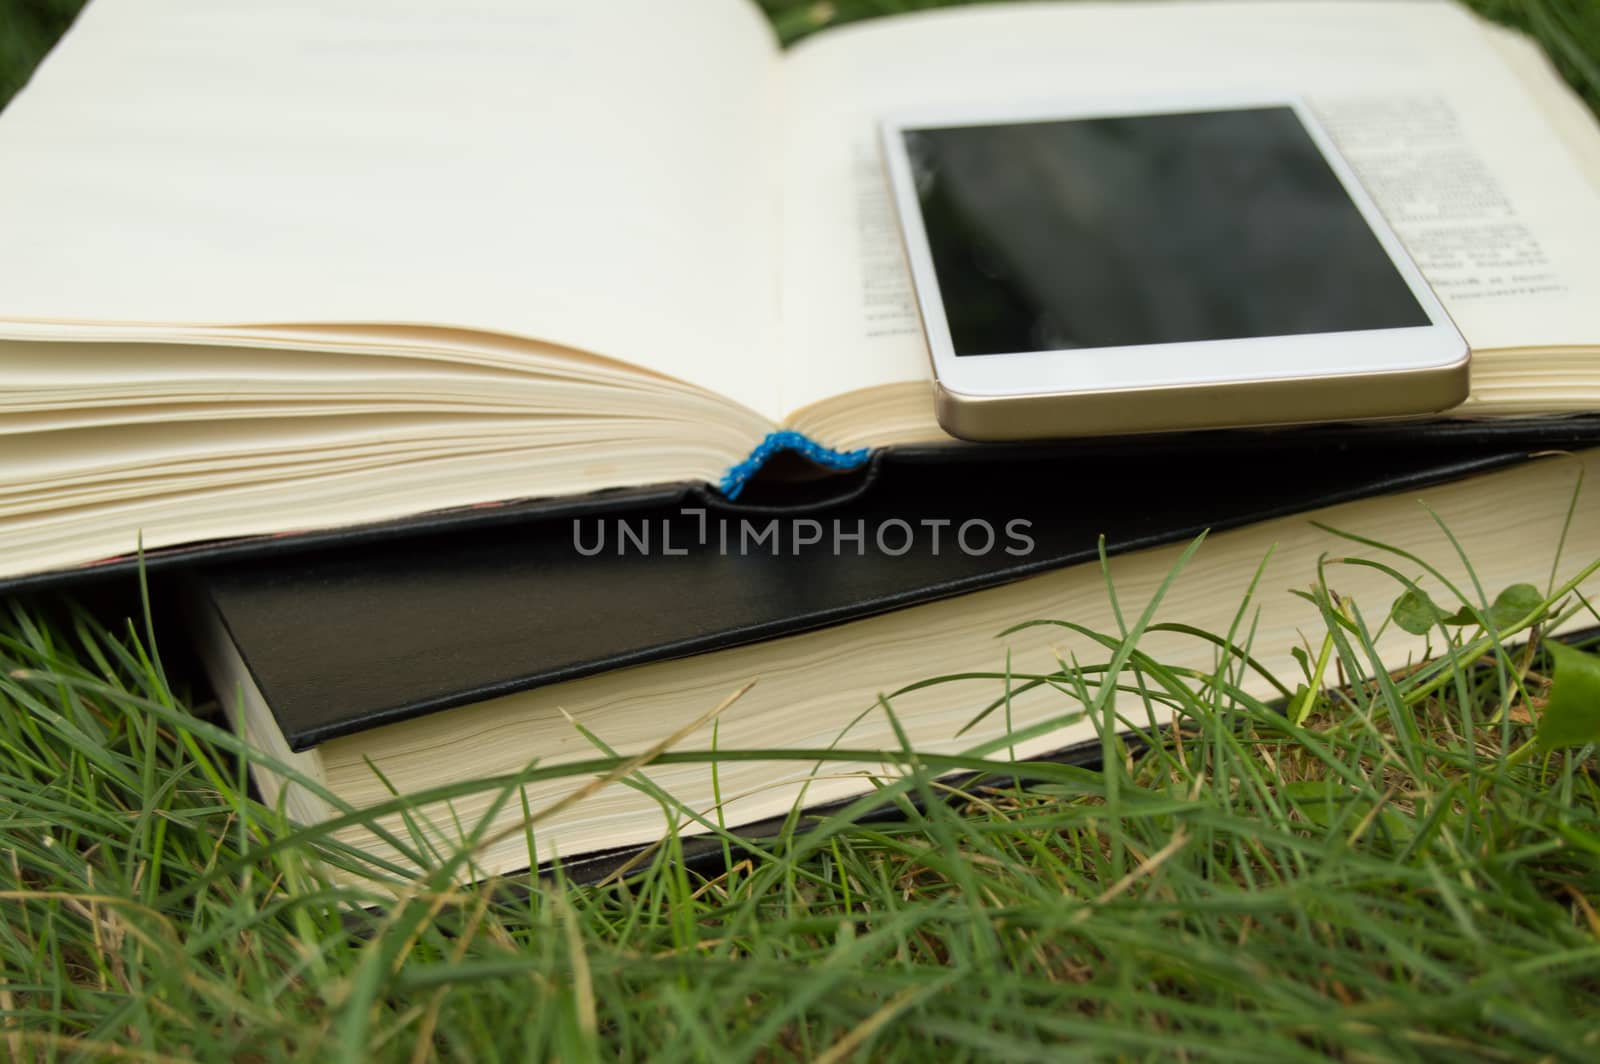 Books, smartphone on a green grass background, concept of education and training.